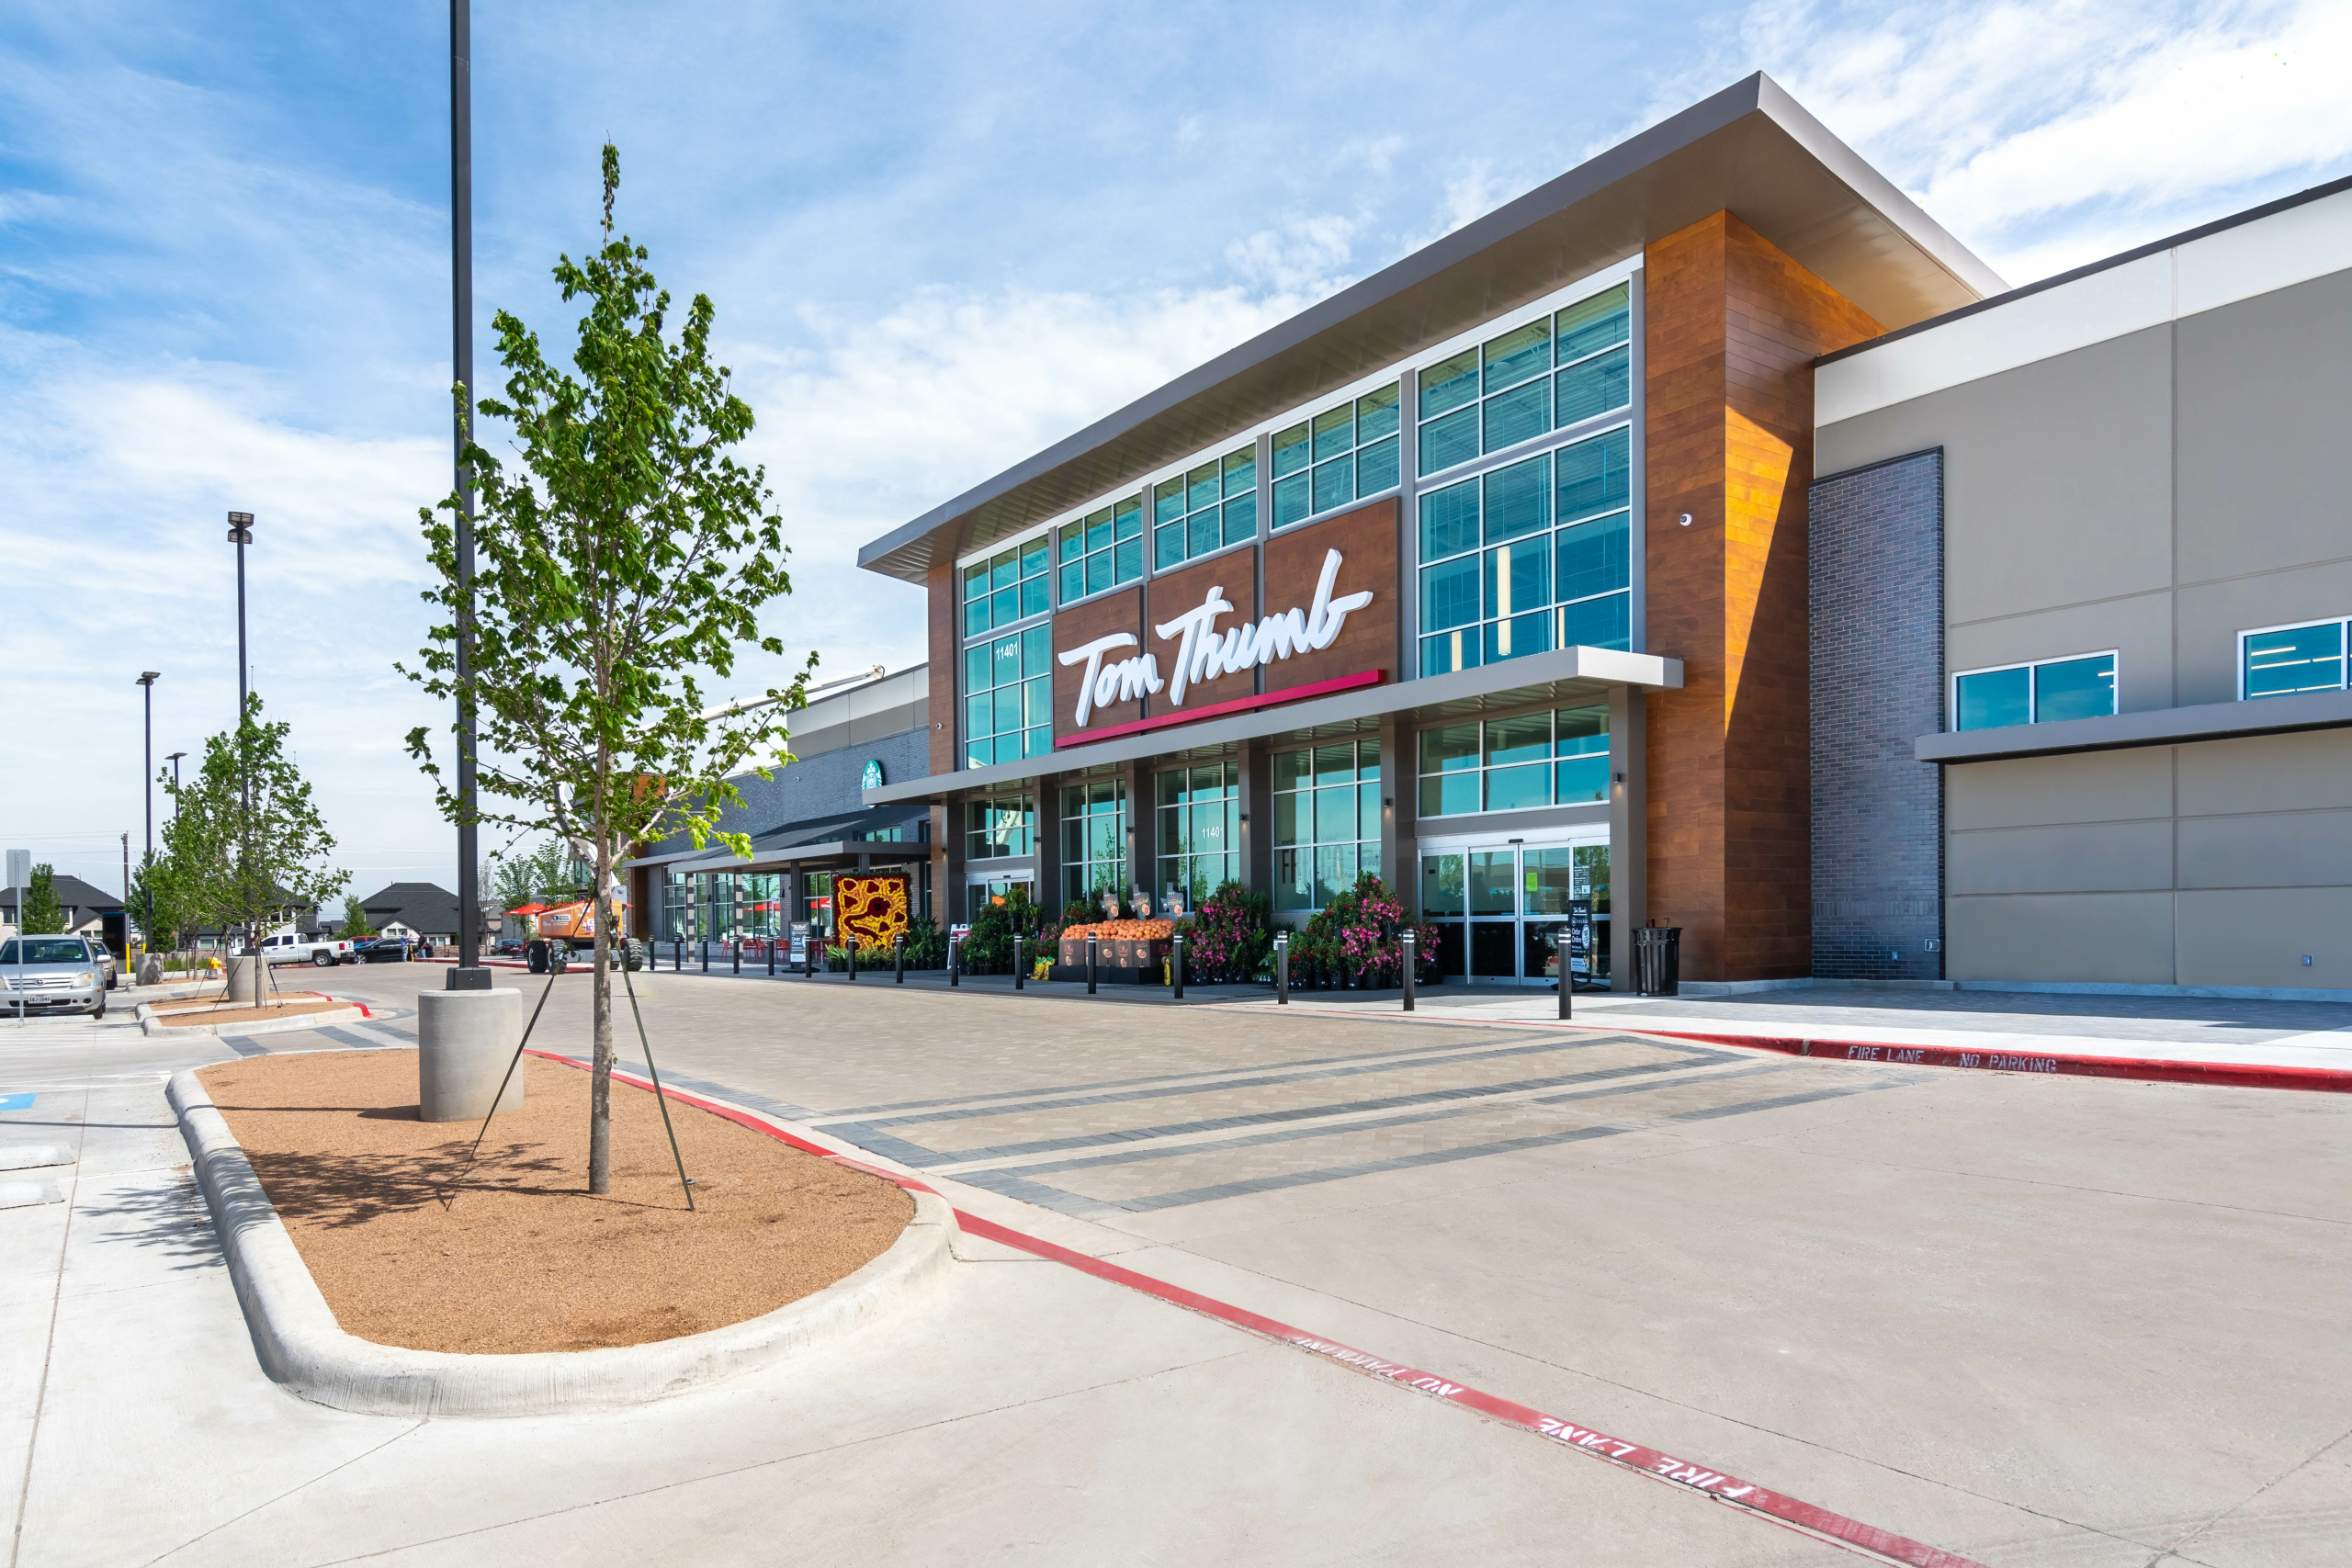 Exterior view of a modern tom thumb grocery store on a sunny day, featuring clear skies, a landscaped parking lot, and prominent store signage.